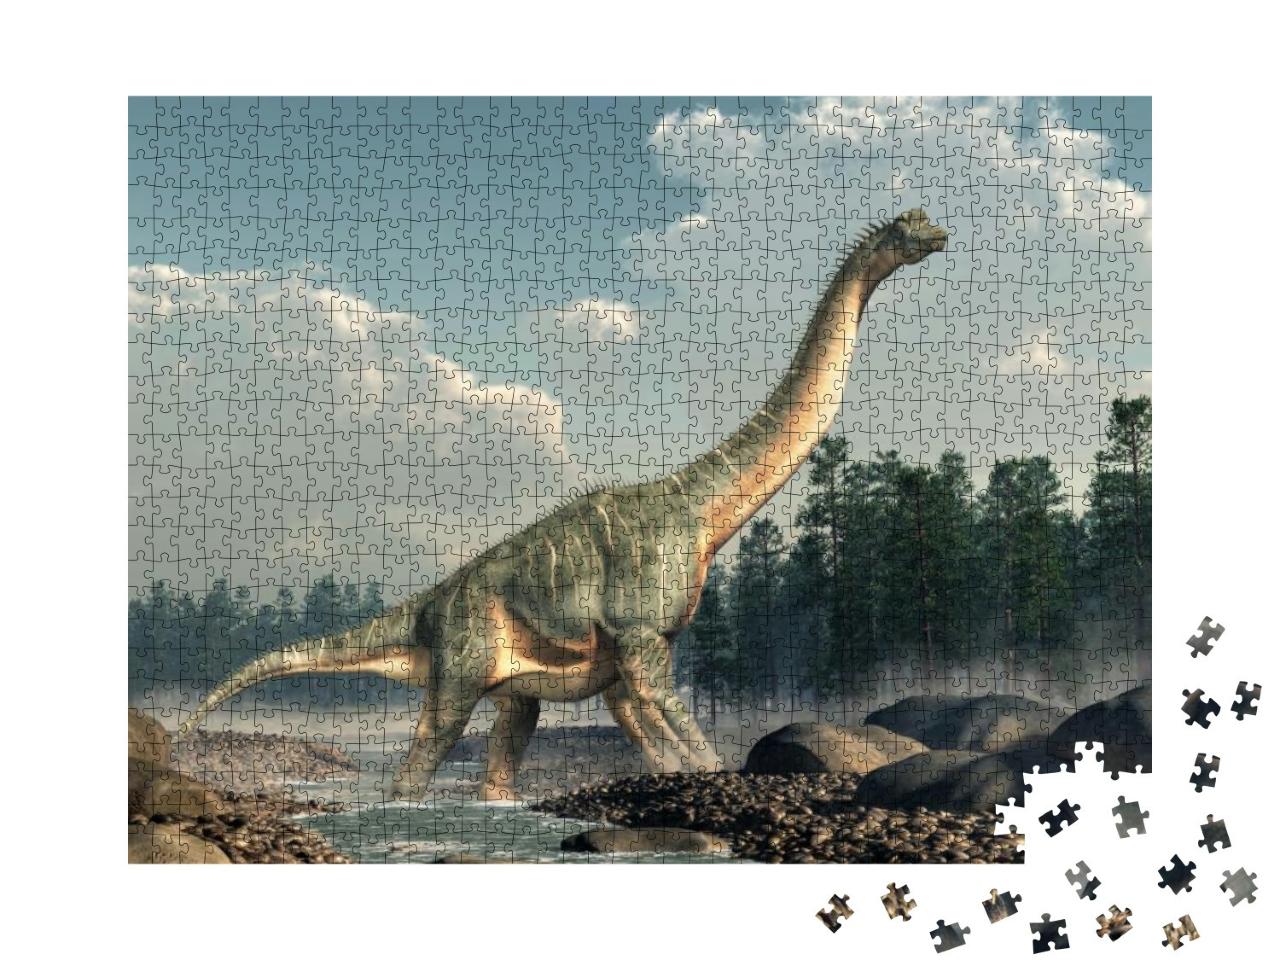 Brachiosaurus Was a Sauropod Dinosaur, One of the Largest... Jigsaw Puzzle with 1000 pieces